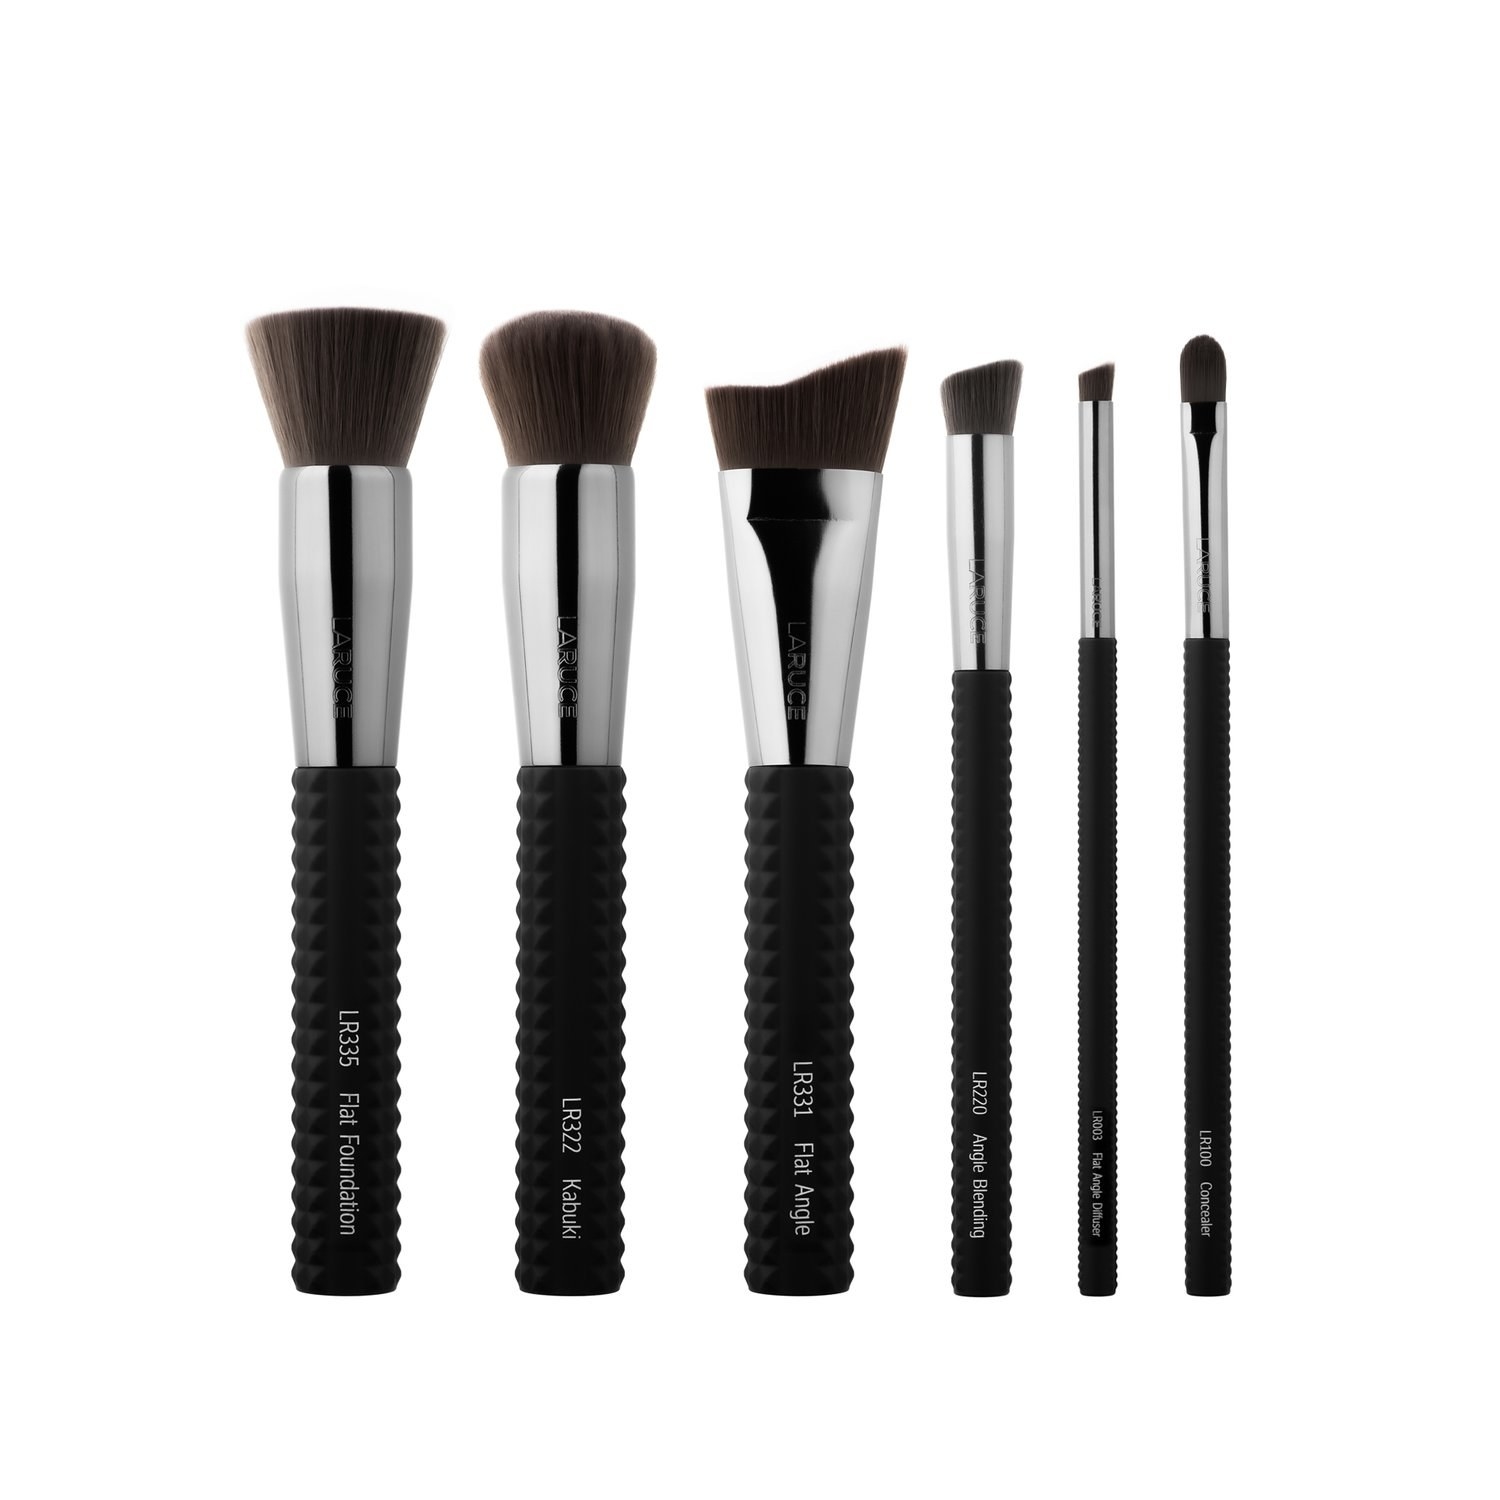 the brush set with different-sized black makeup brushes